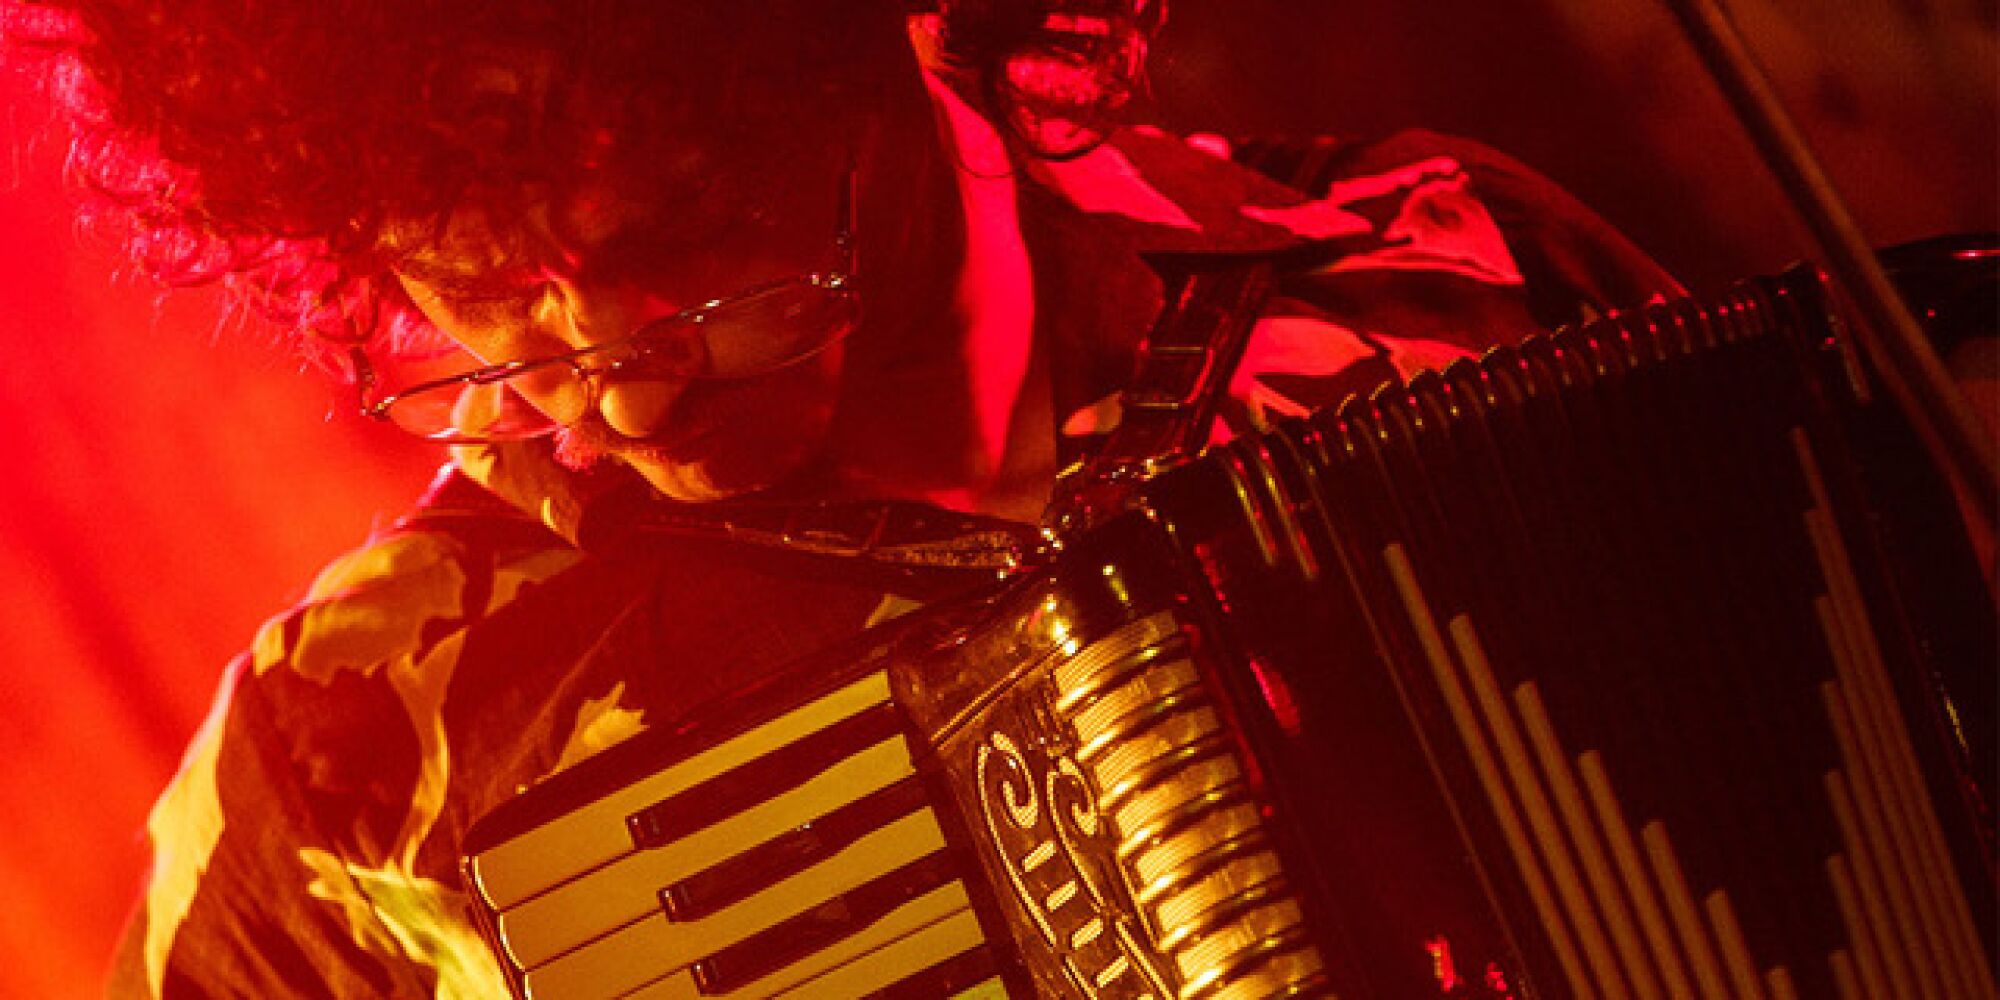 A close-up of a man playing an accordion